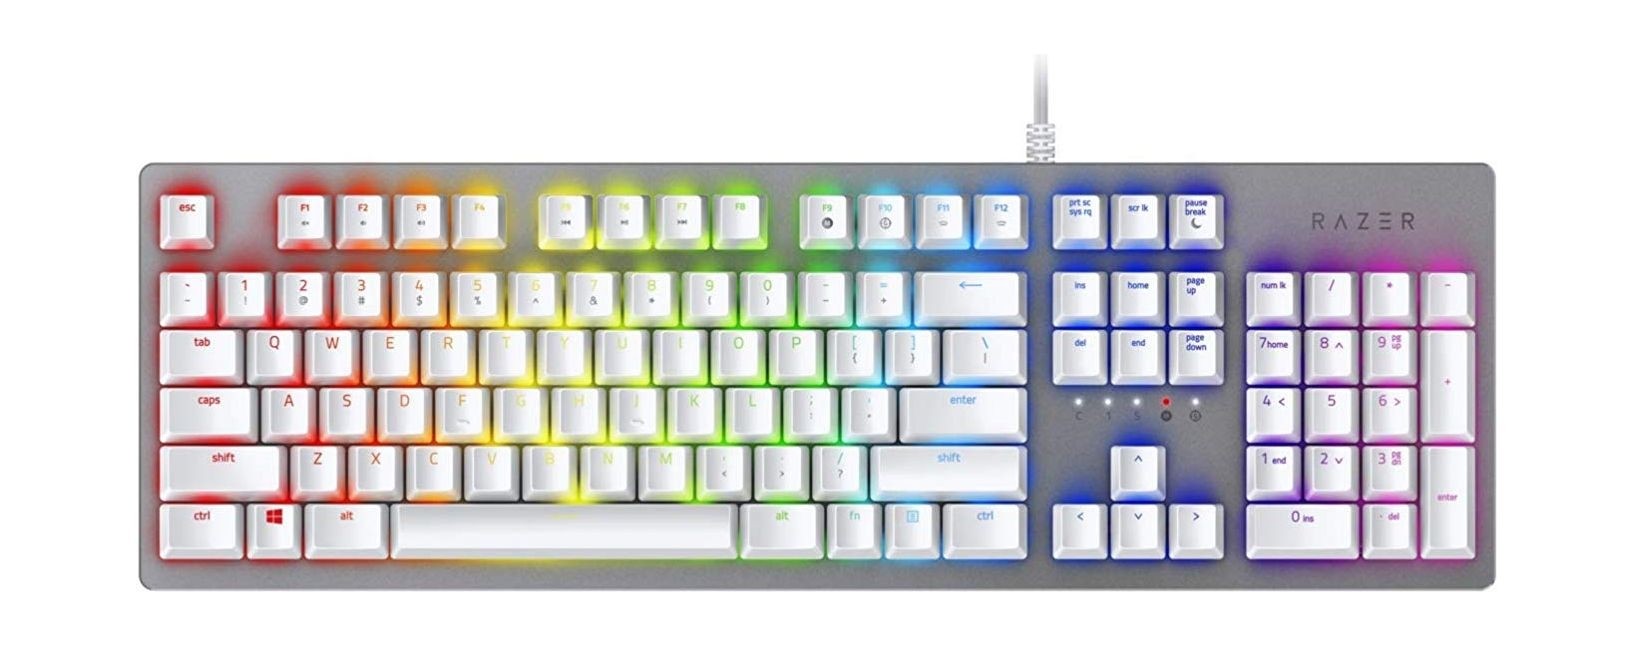 Opto-Mechanical Switches Durability of upto 100 Million Keystrokes US Layout Light and Clicky Gaming Keyboard Hybrid On-Board Memory and Cloud Storage White Razer Huntsman Mercury